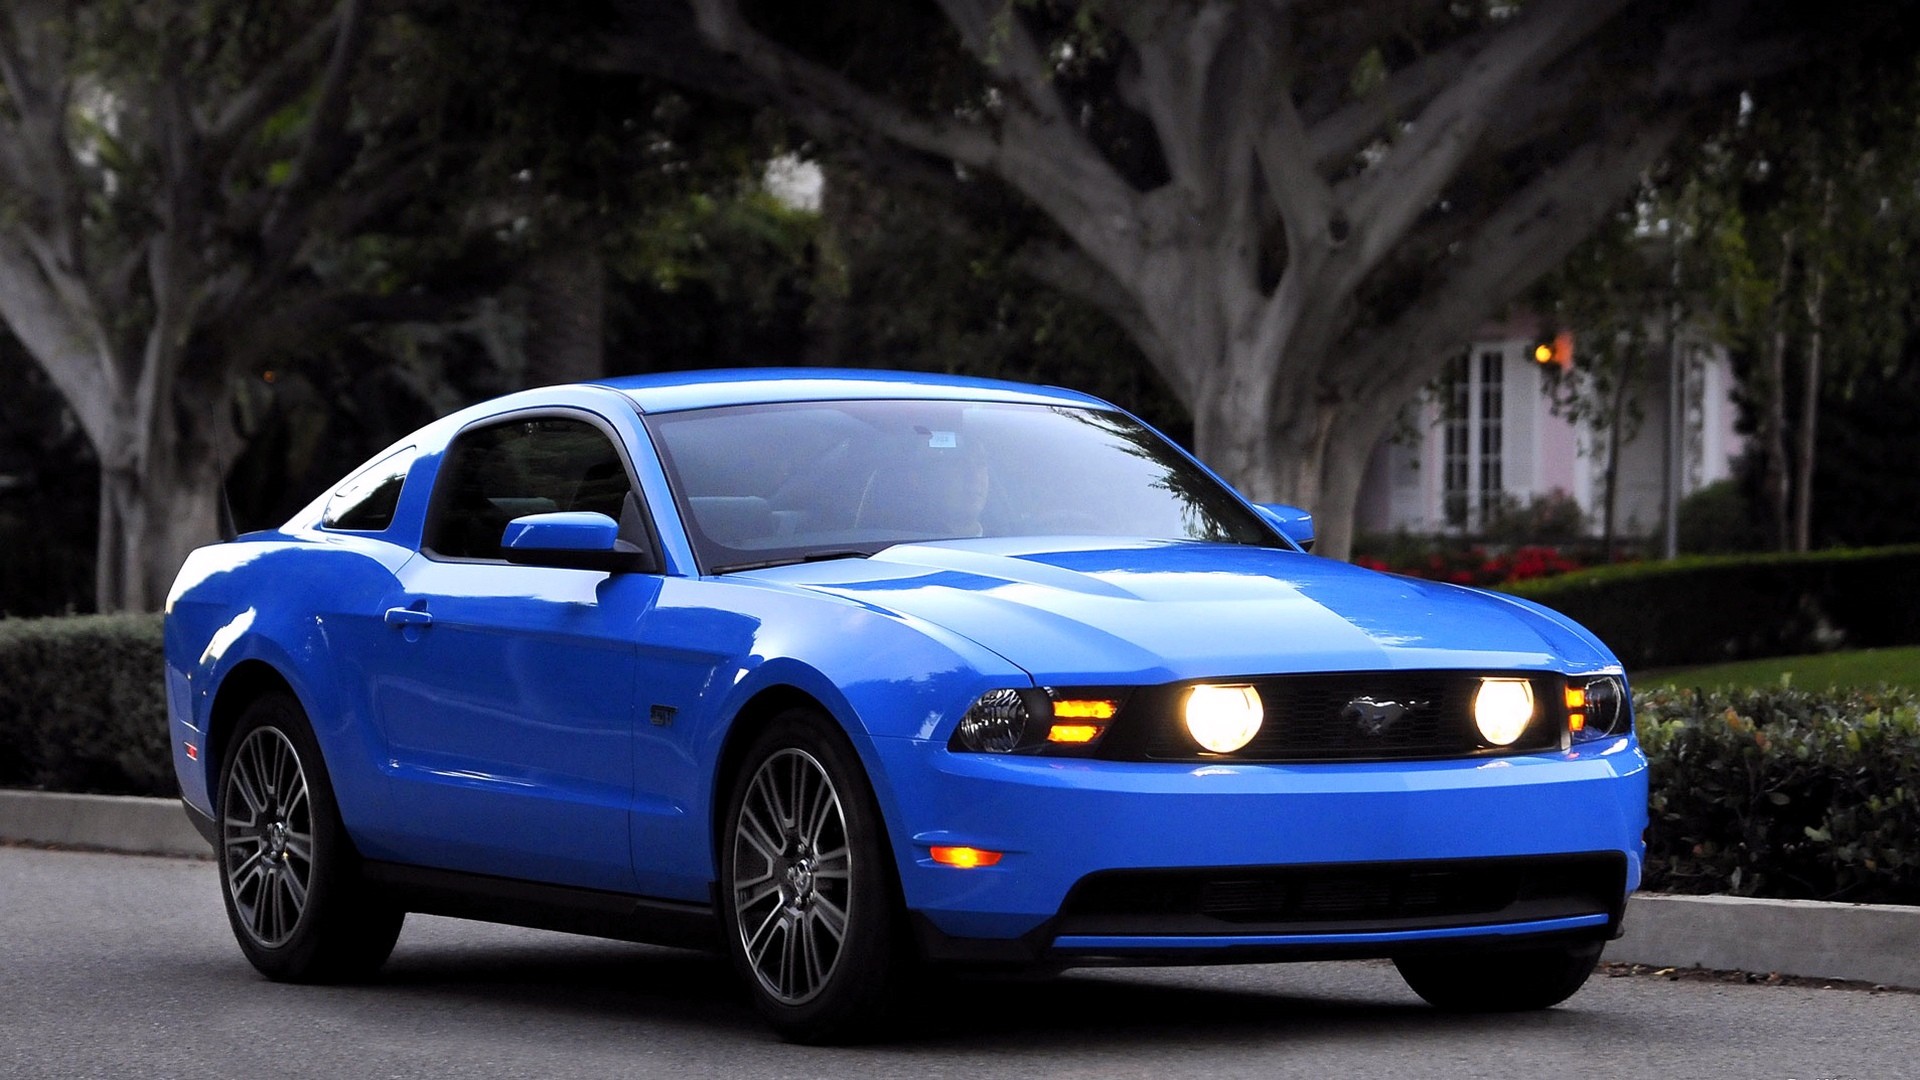 General 1920x1080 car Ford Mustang vehicle blue cars Ford muscle cars Ford Mustang S-197 II American cars